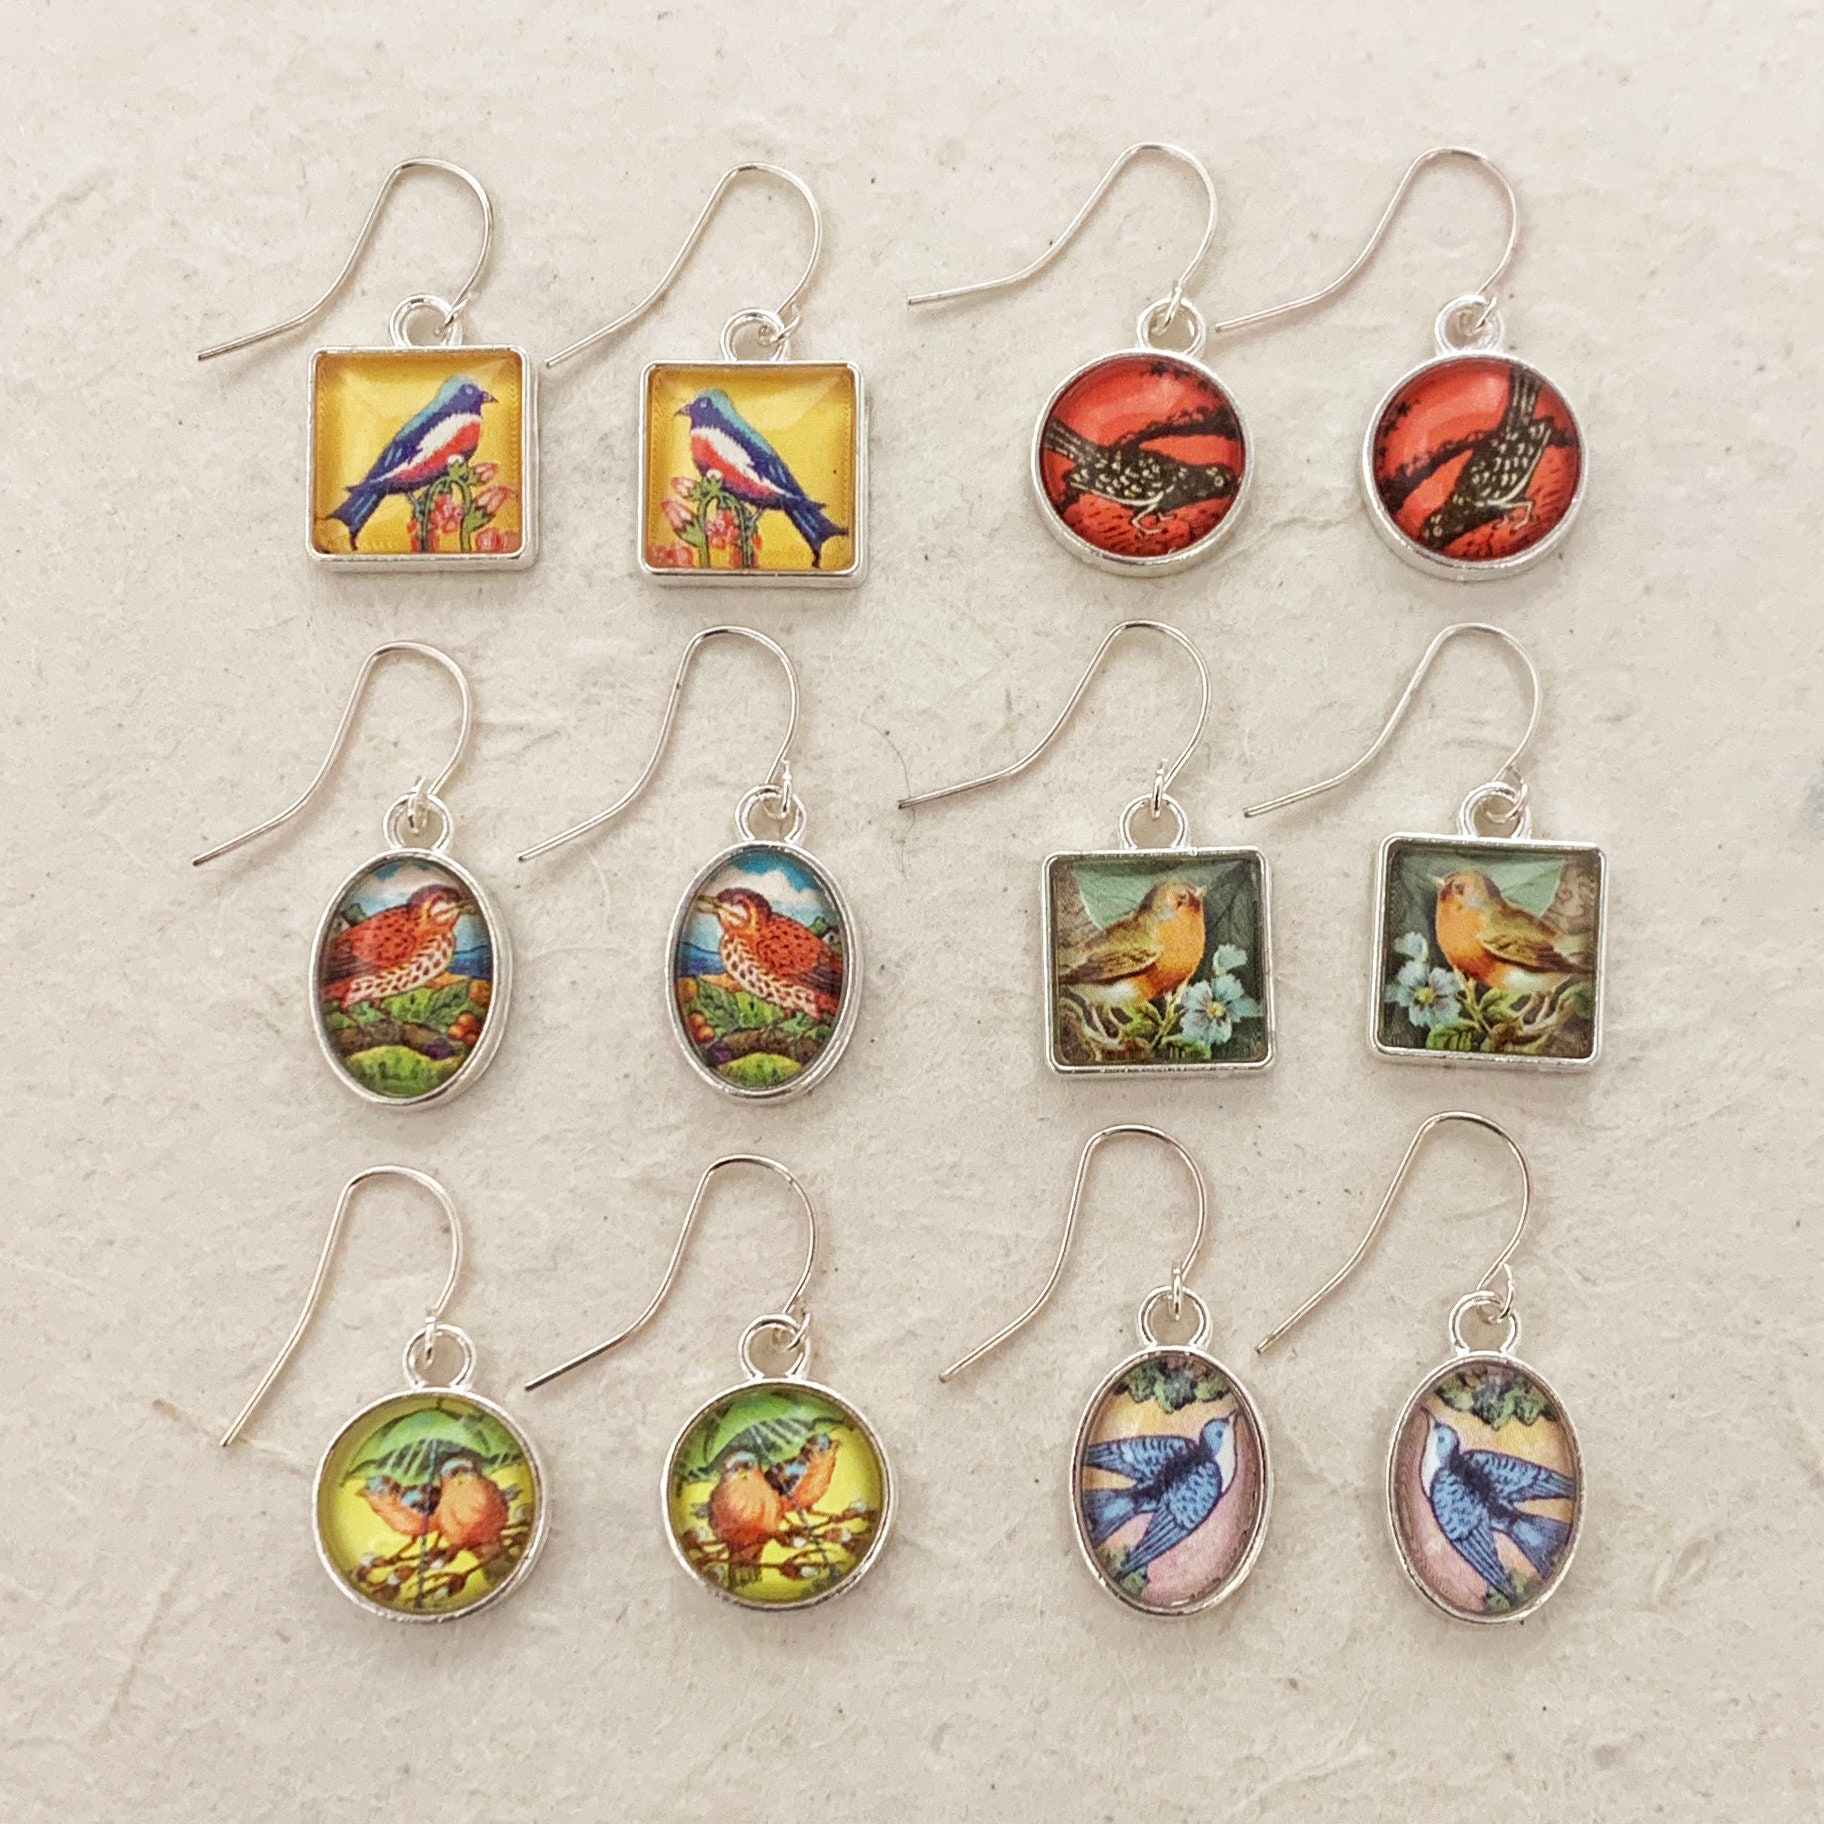 Polymer Clay Earring Making Kit, Gift for Teens and Adults, Make 12  Earrings, Jewelry Making Supplies for Kids and Adults Arts and Crafts 